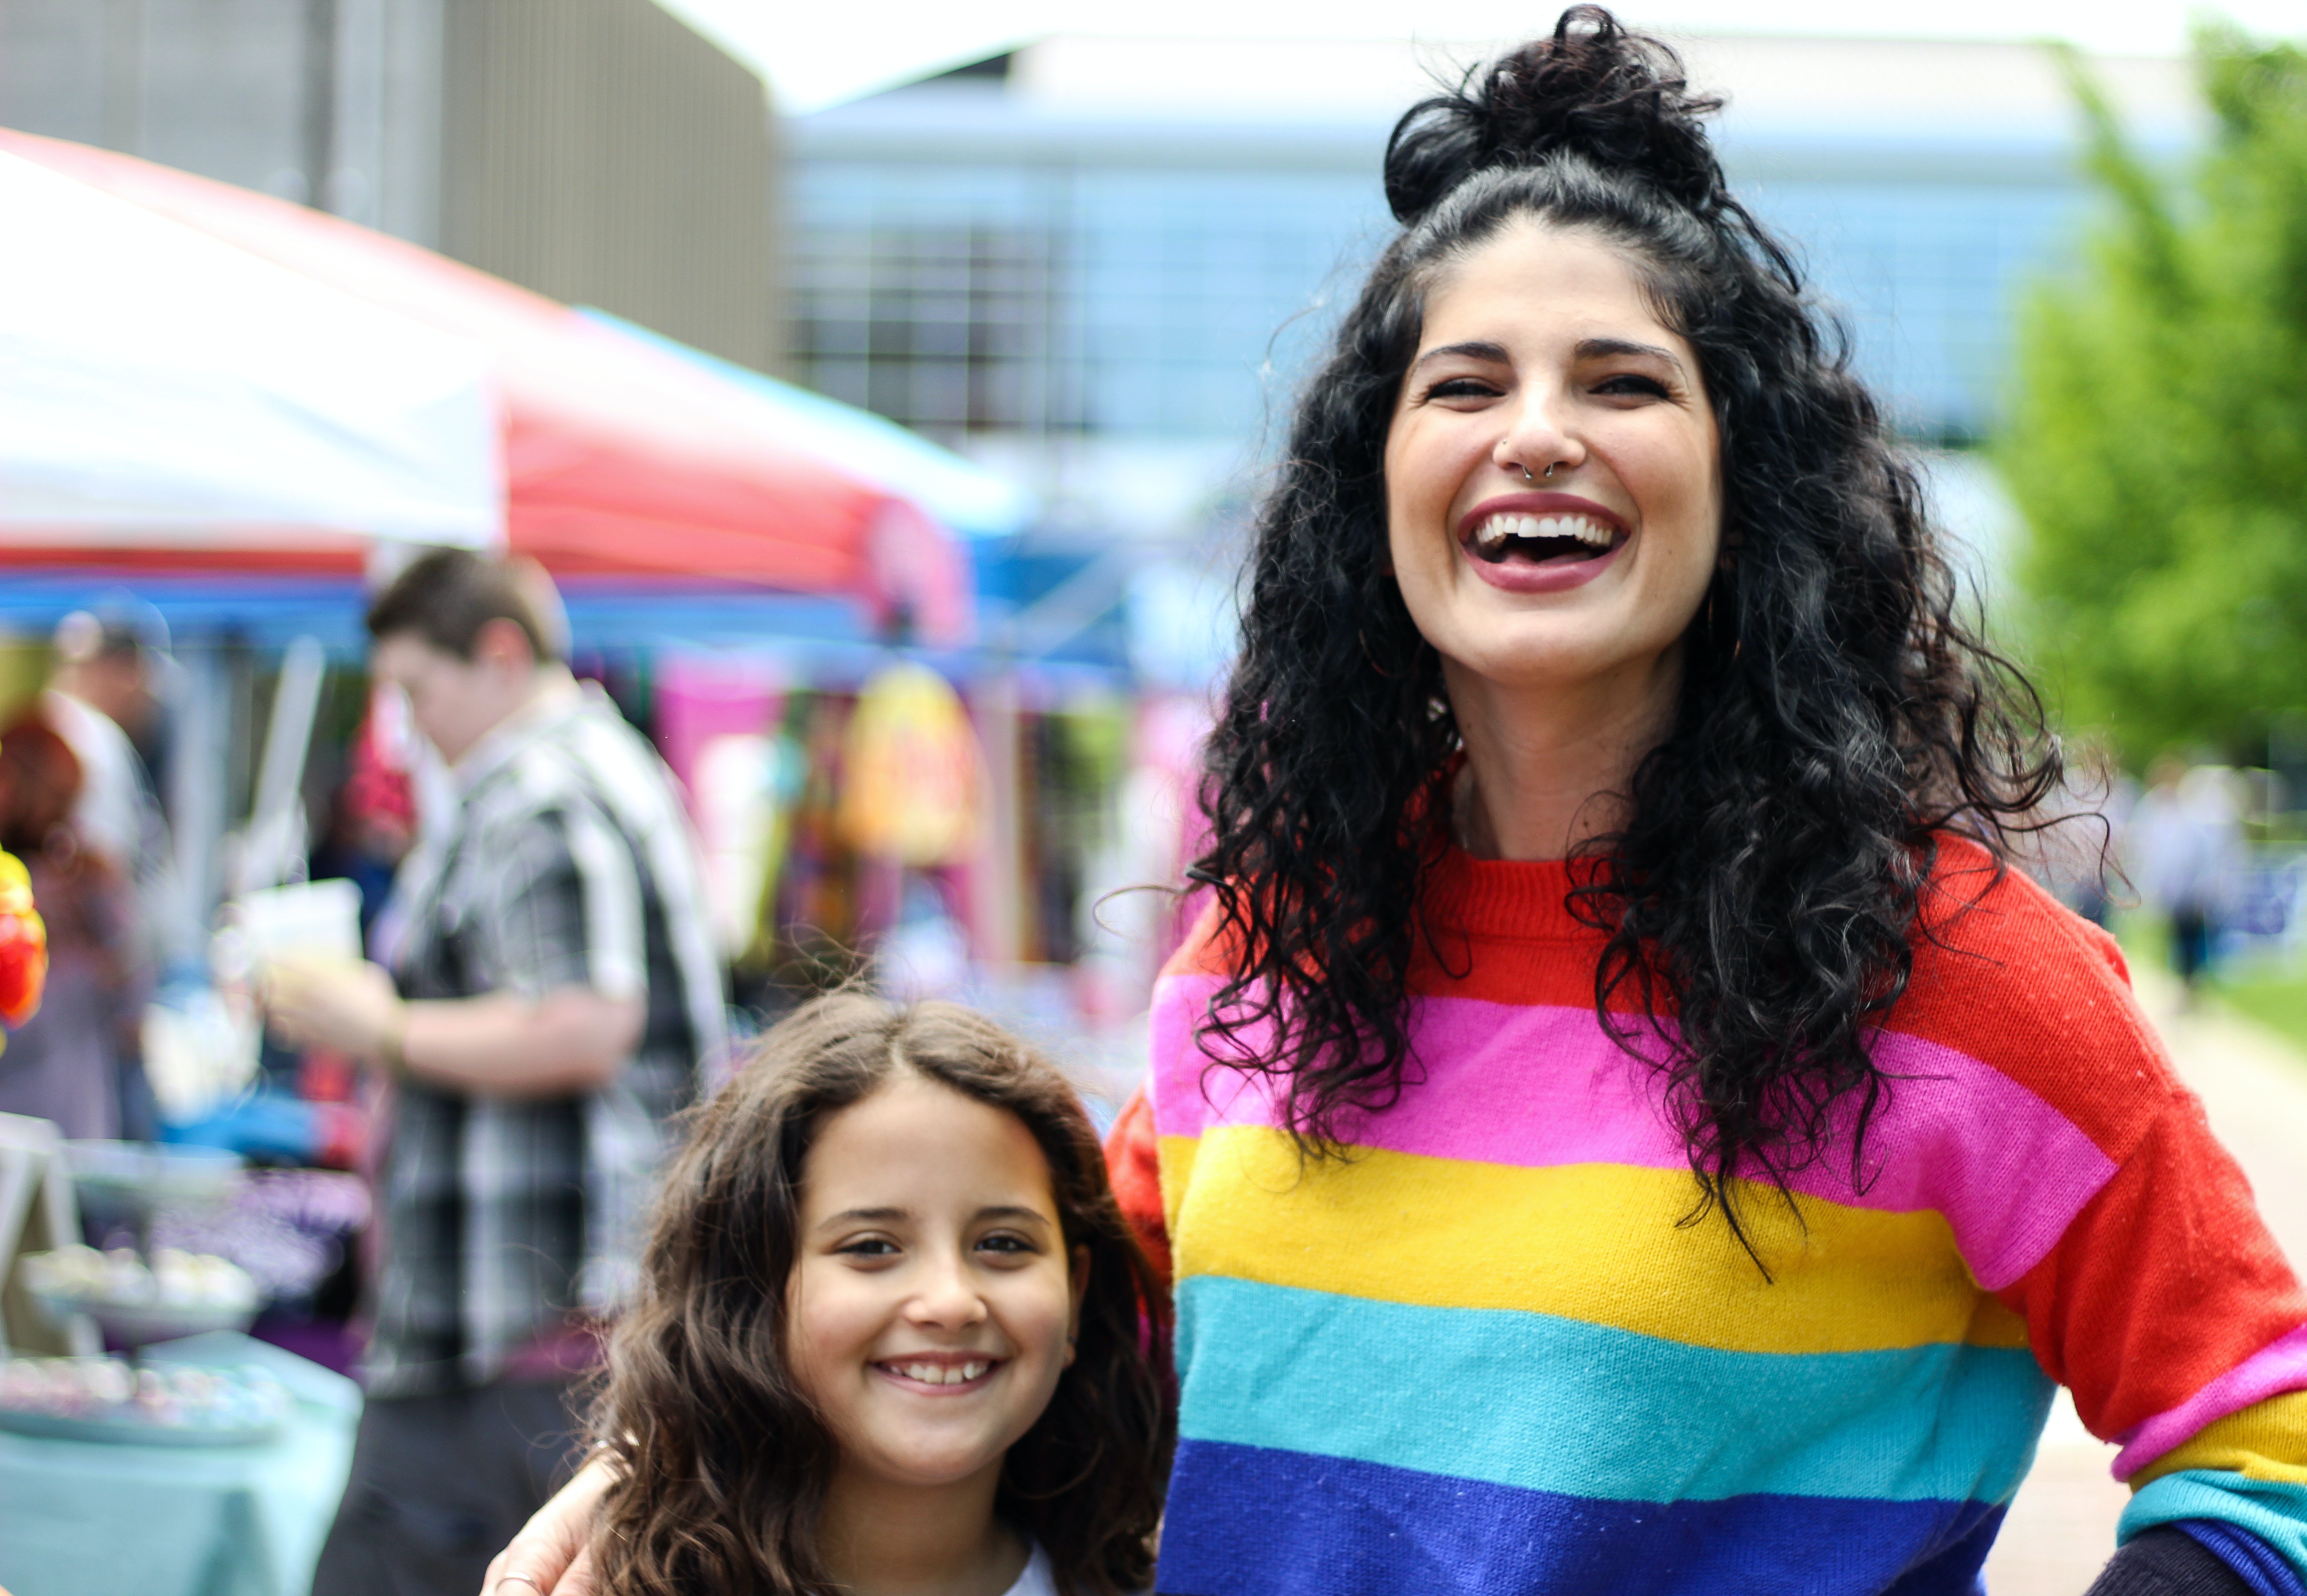 A woman wearing a rainbow sweater laughs while standing next to her young daughter smiling as well.